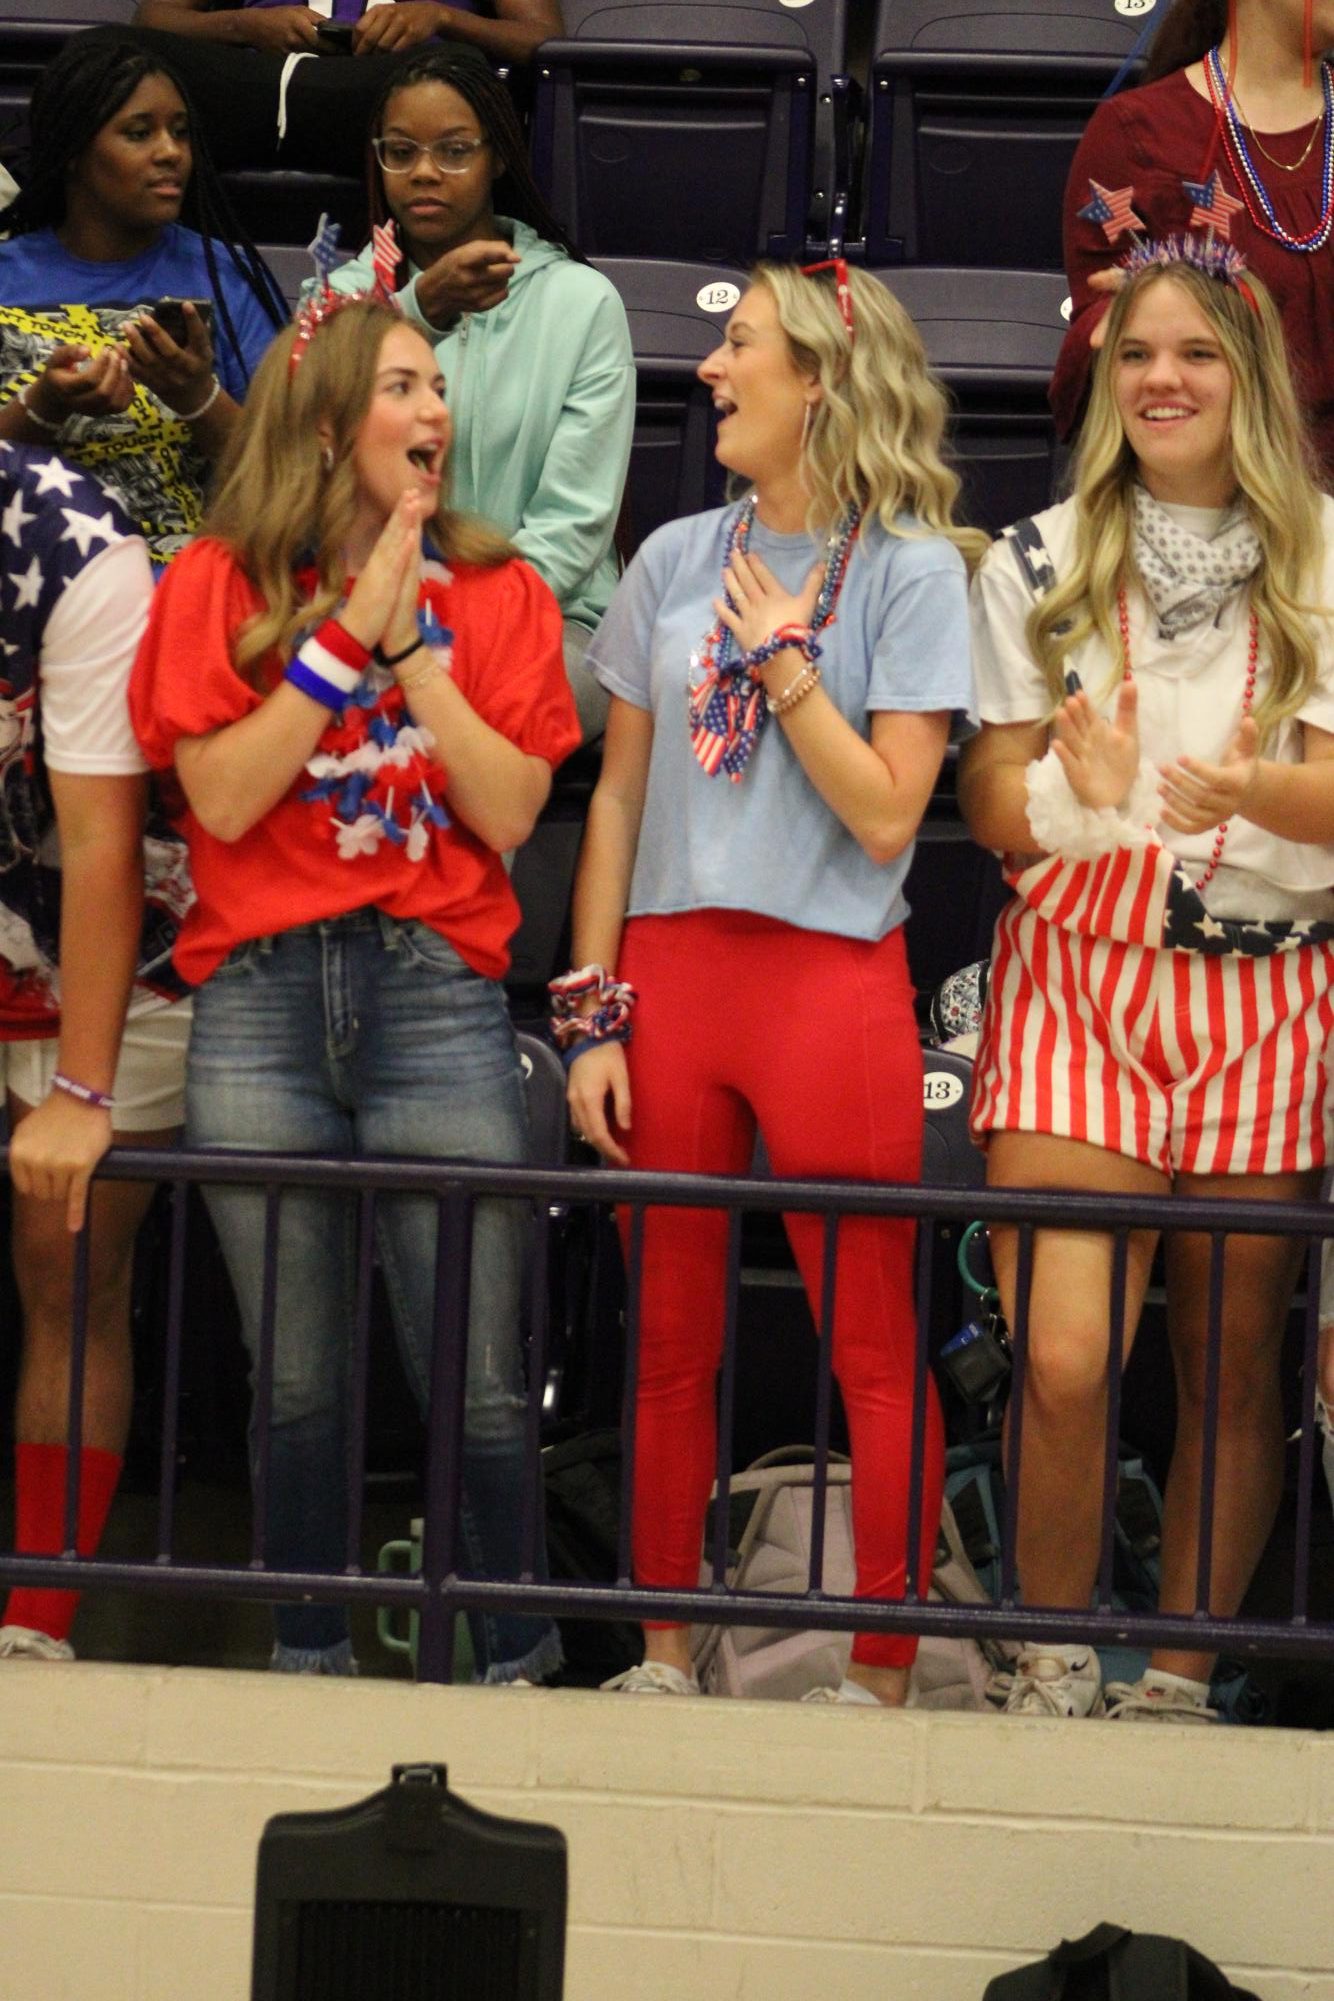 Queen Cheney (12) and friend Kennedi Sheltons (12) reaction upon hearing the announcement 